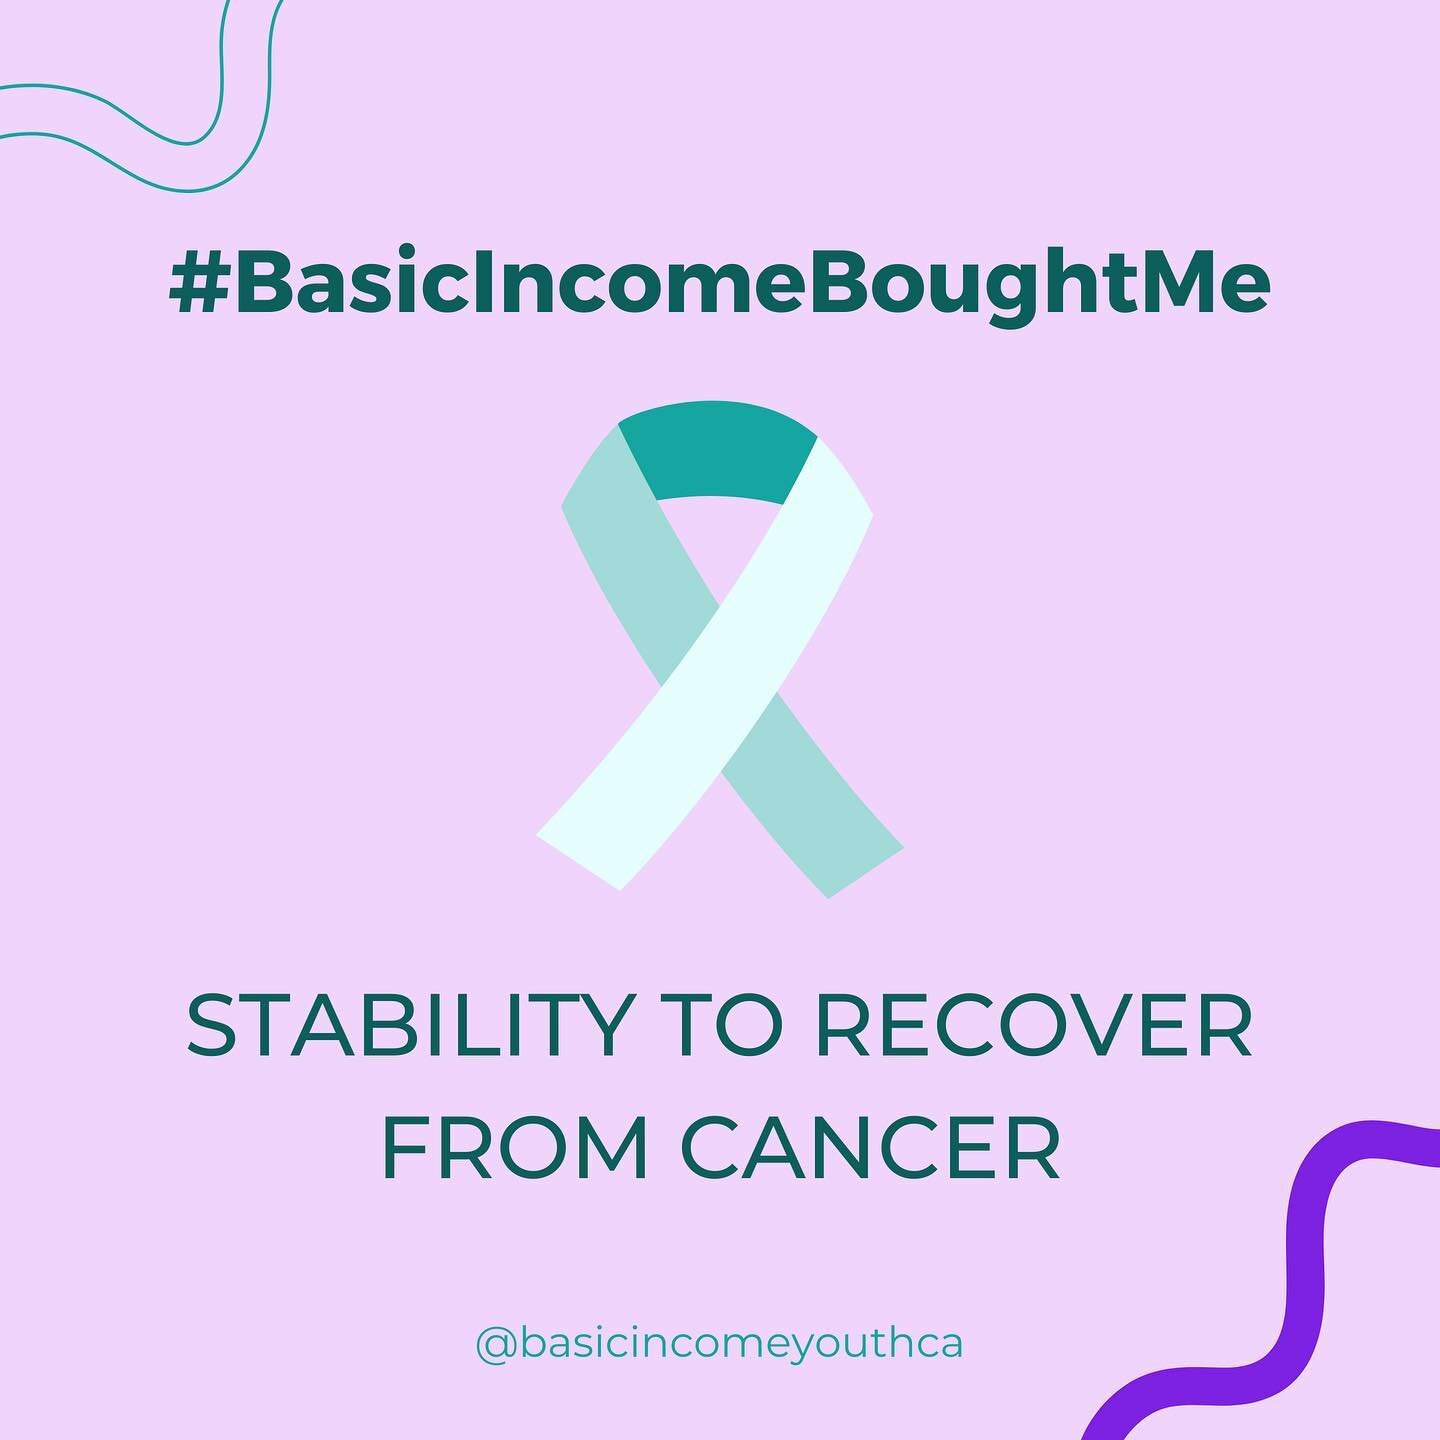 For this OBIP participant, #BasicIncomeBoughtMe the stability to recover from cancer. By having a stable income source to rely on during their treatment, they were able to stay comfortably in their home and have access to high-quality food. No one sh